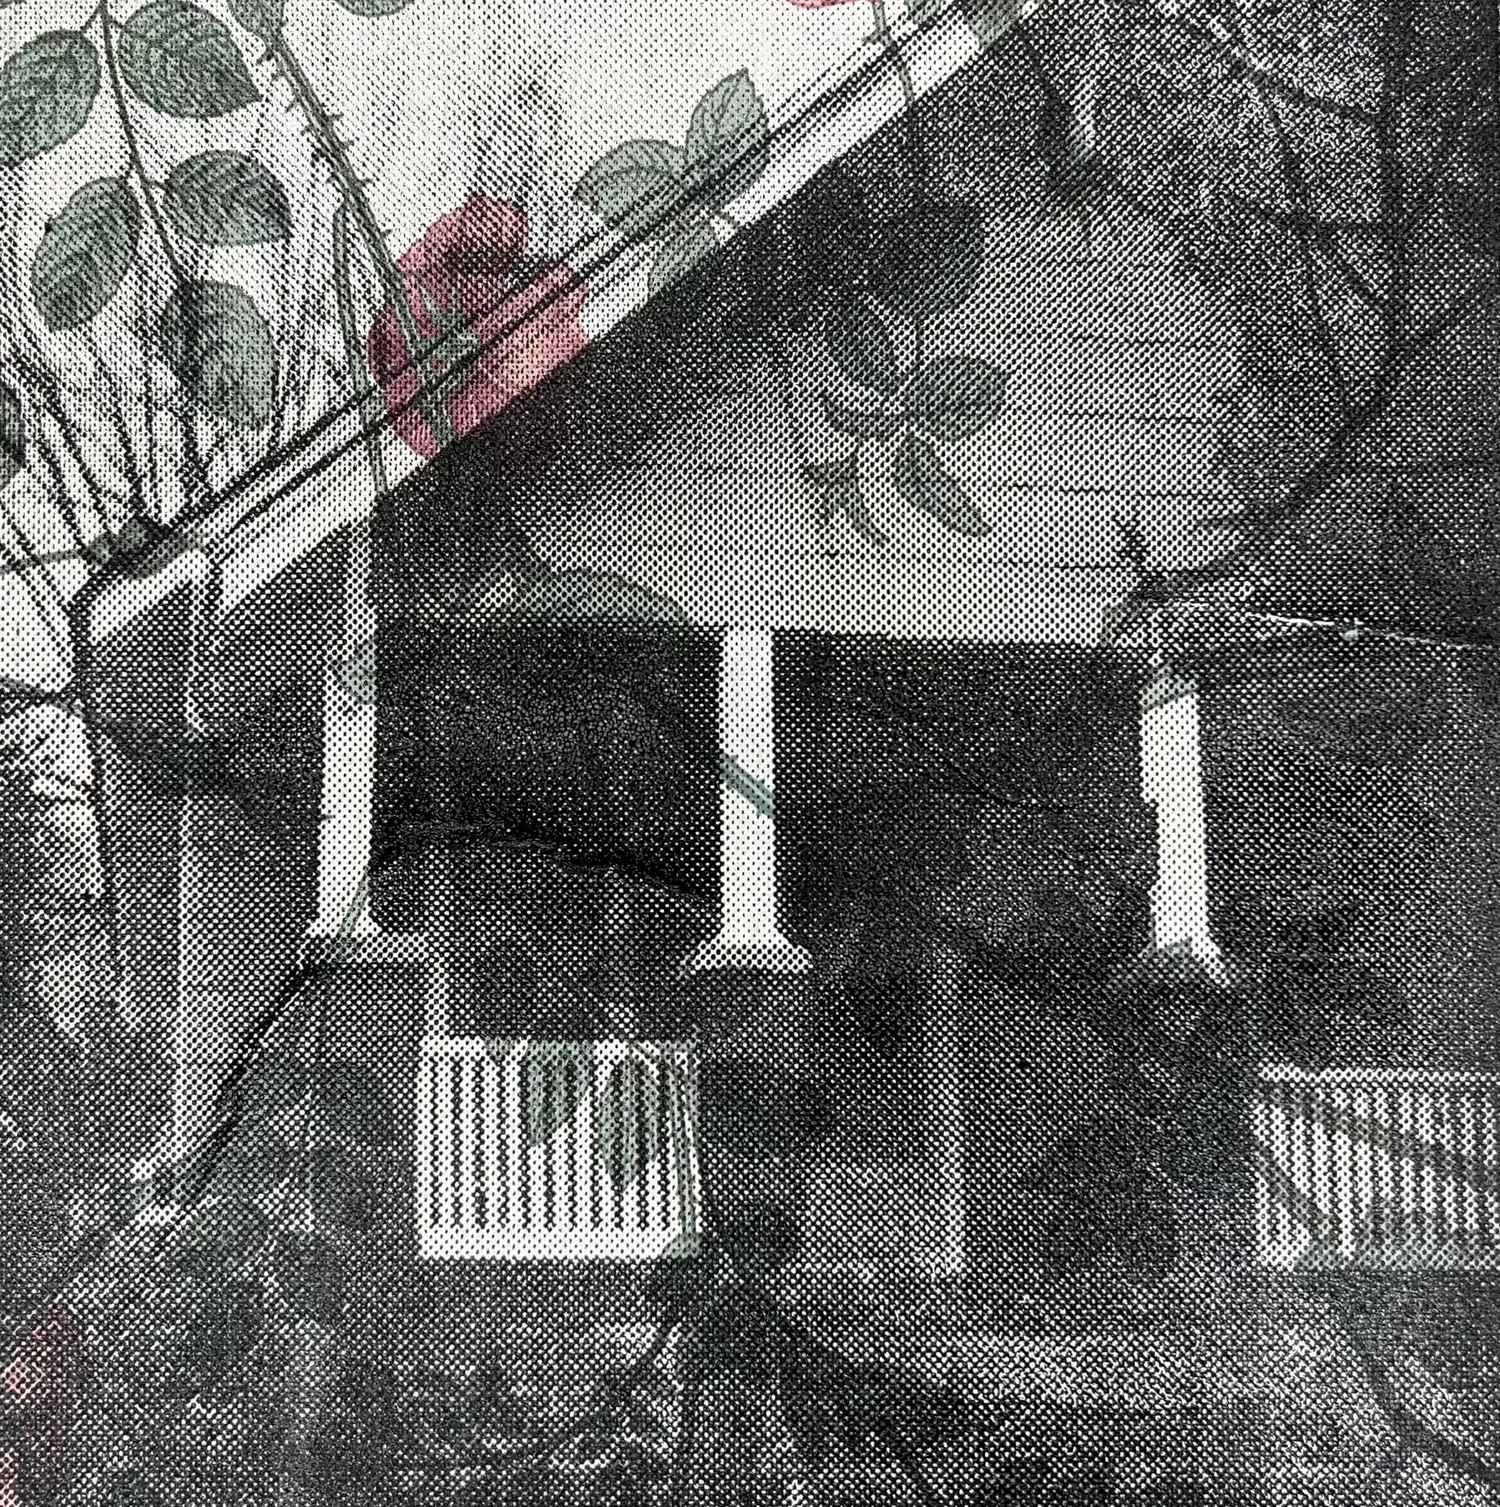 A screen print of the artist's father's childhood home on wallpaper.